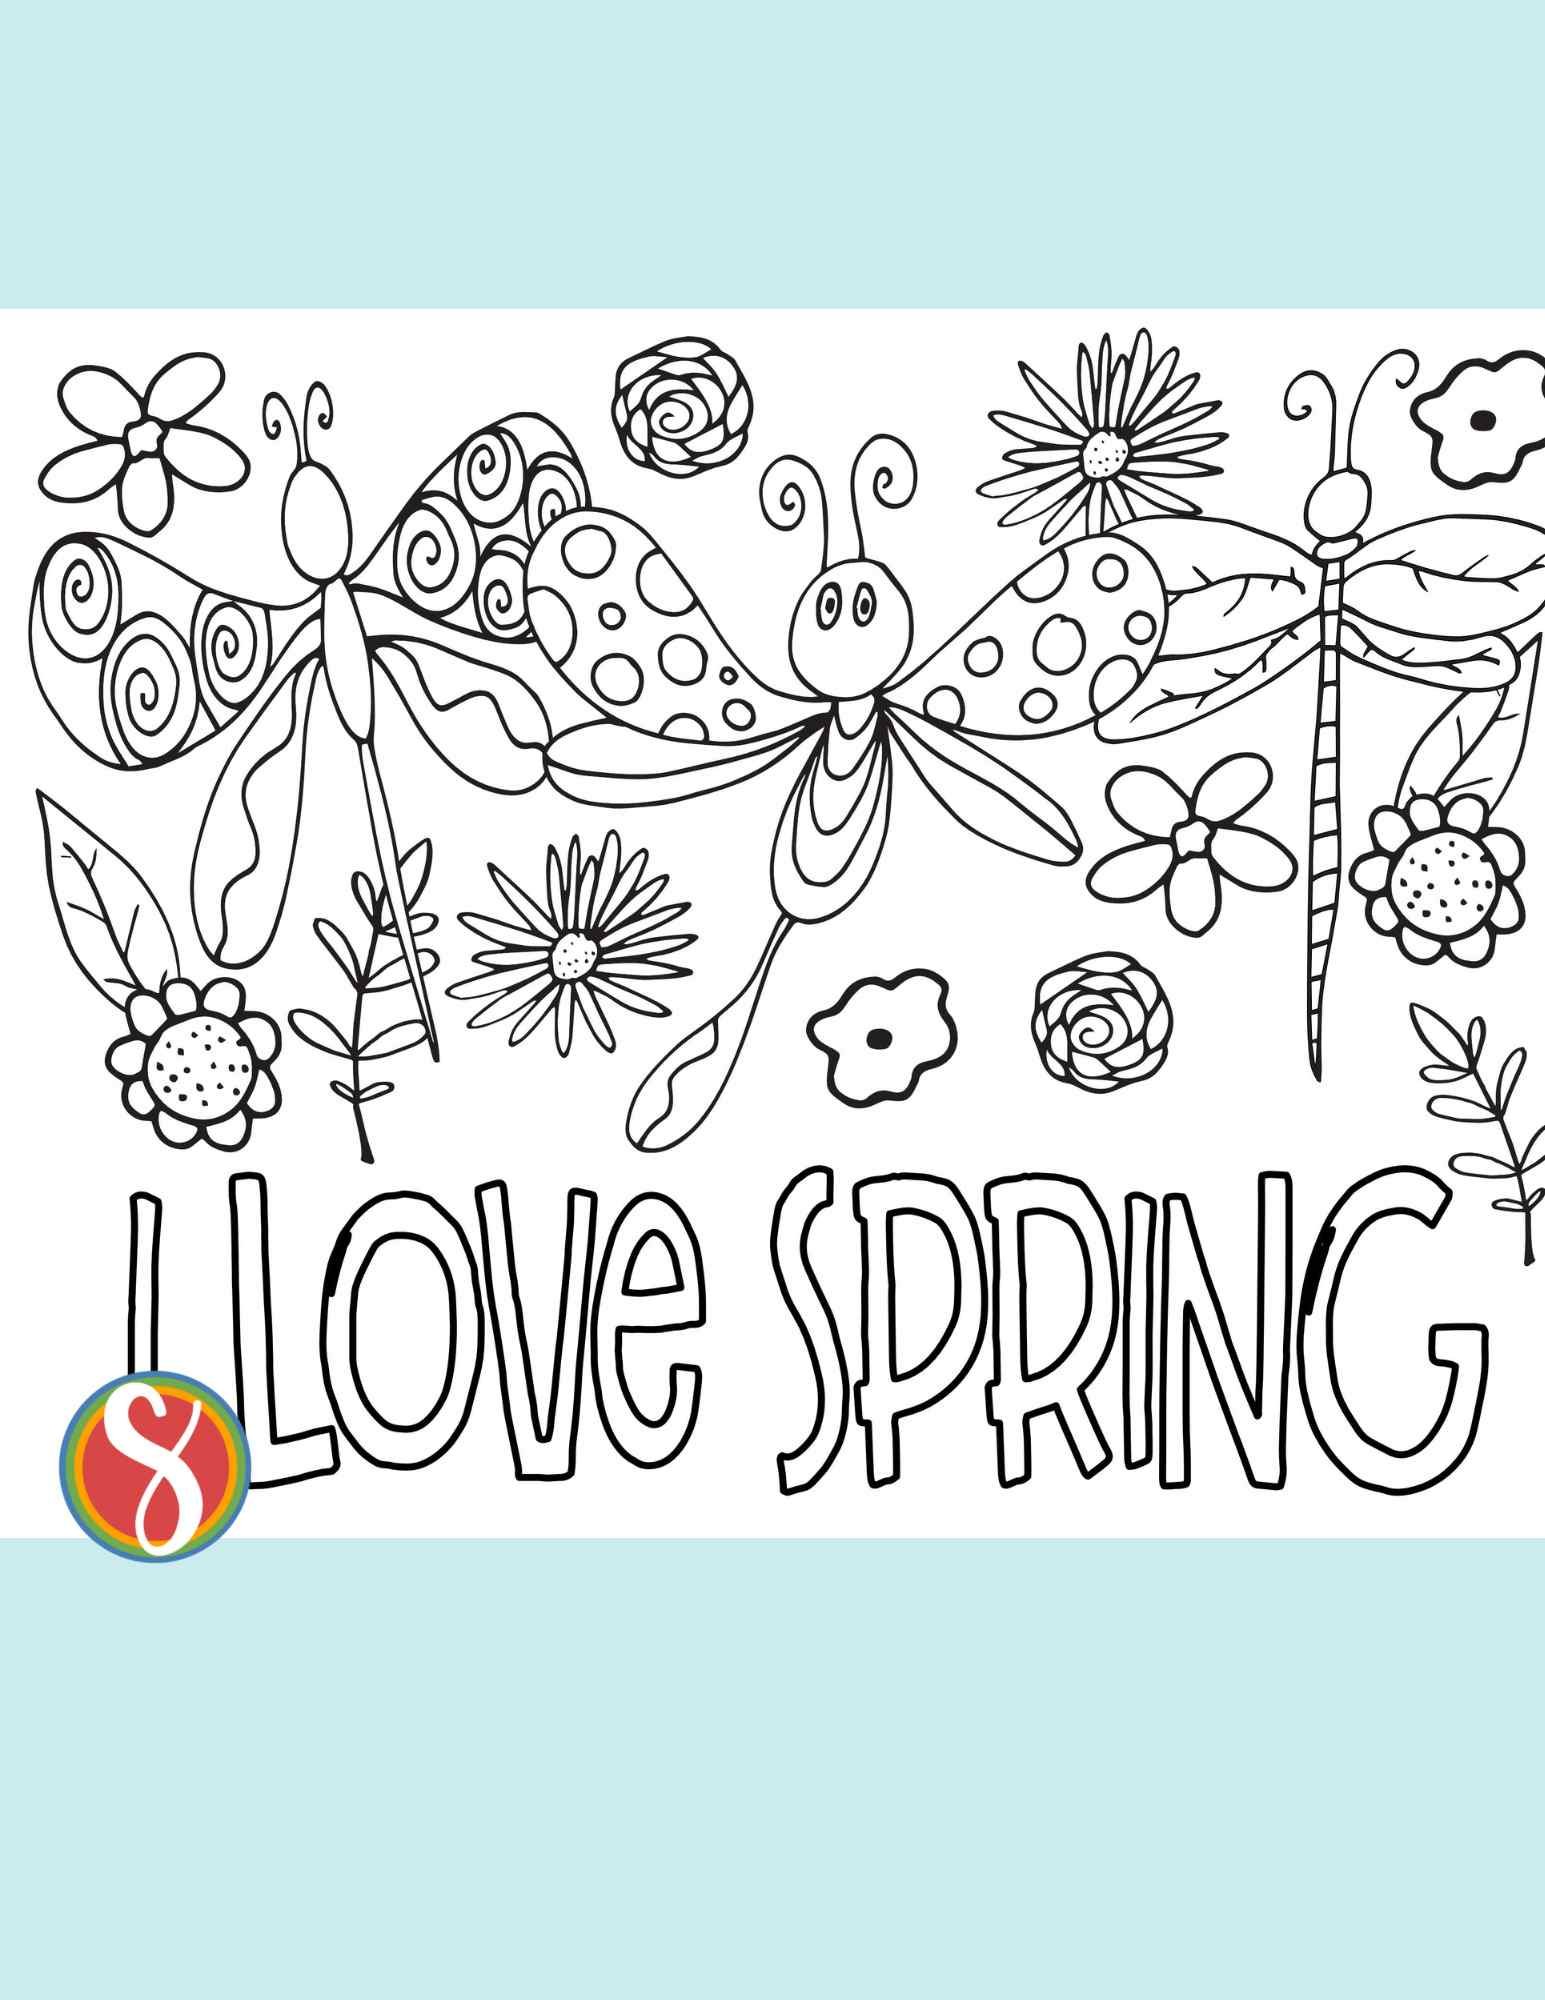 3 dragonflies coloring page with flower background and "i love spring" colorable text